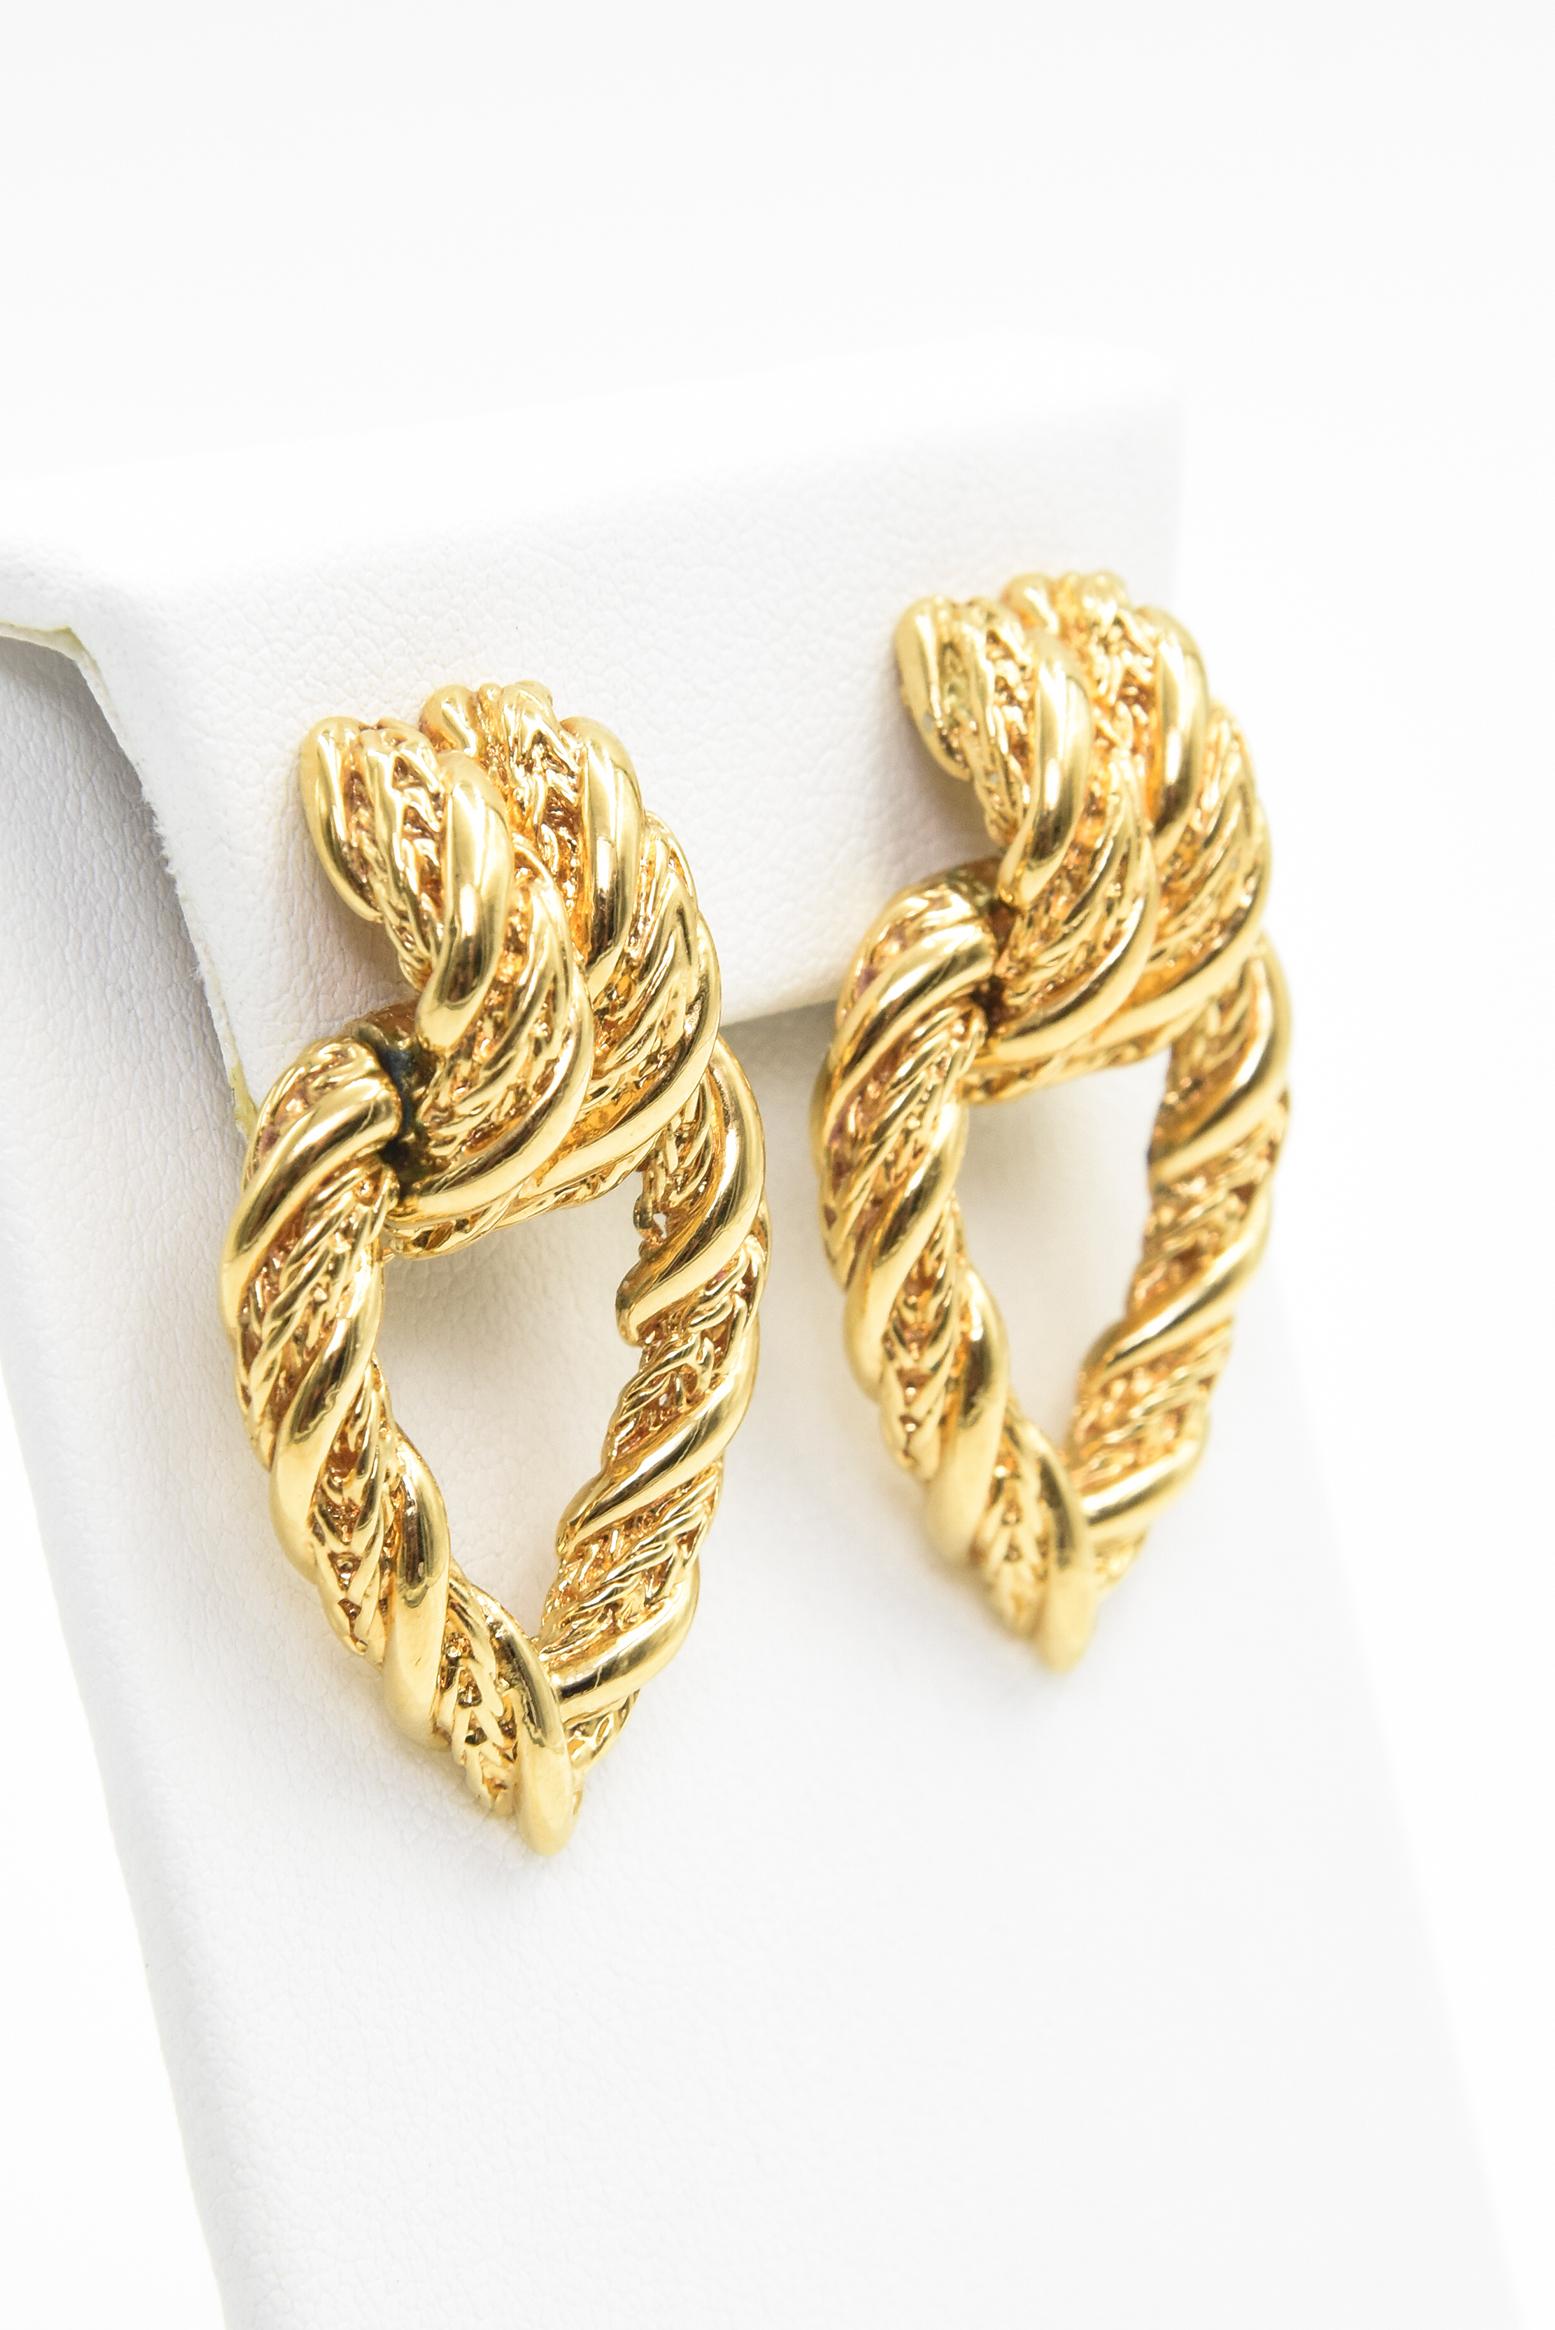 Mid 20th Century Textured Stylized Gold Tone Door Knocker Clip On Drop Earrings In Good Condition In Miami Beach, FL